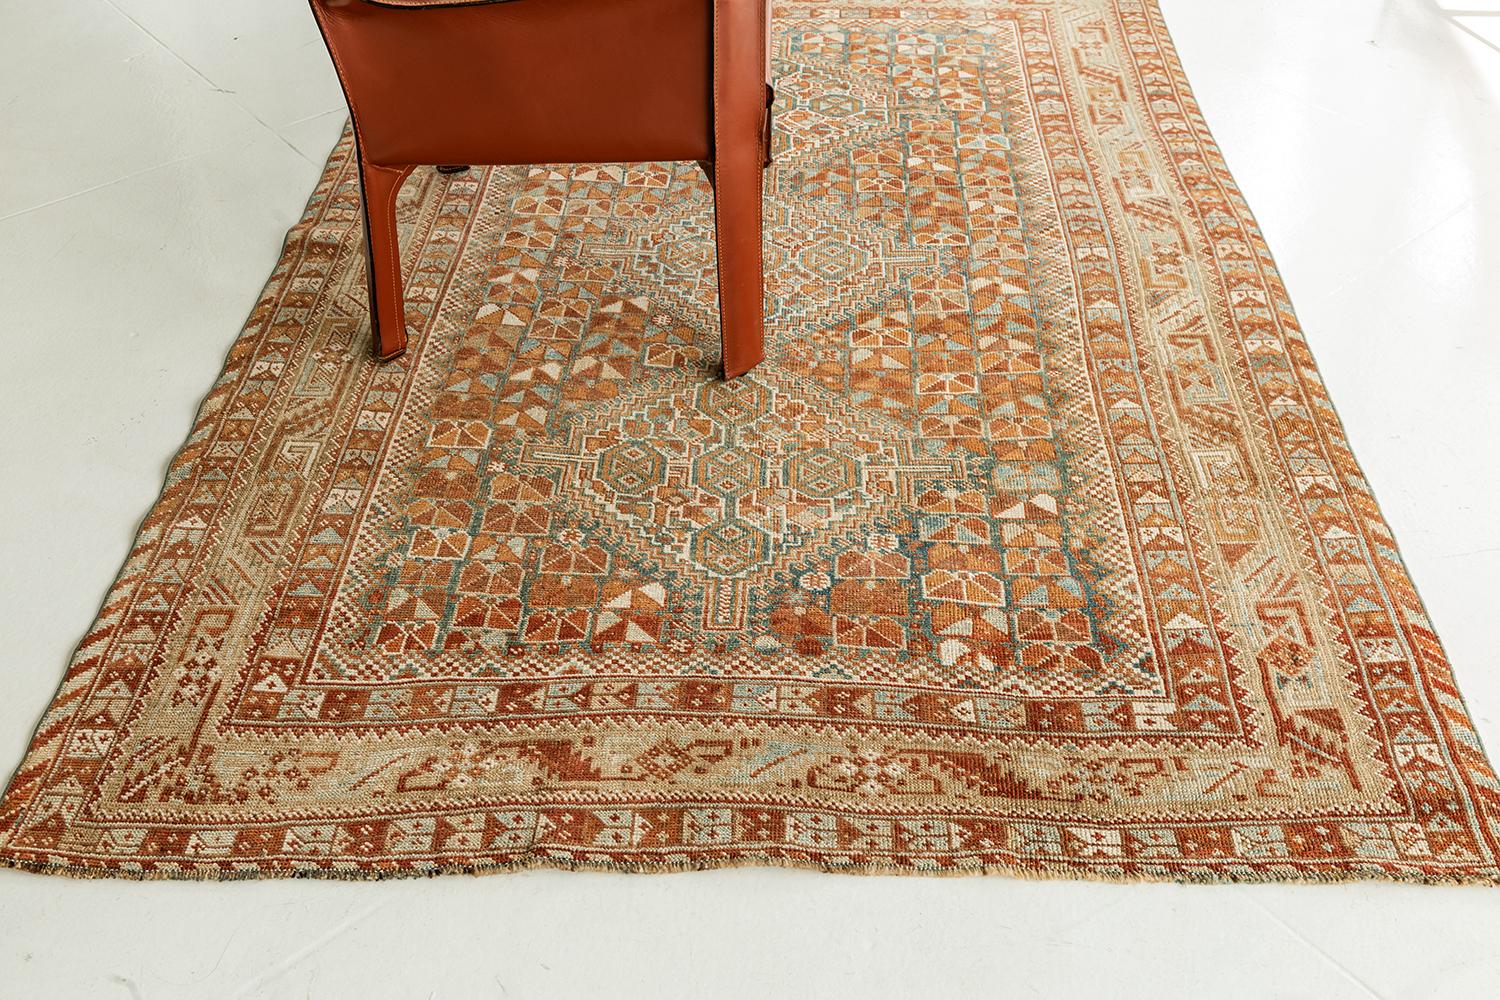 This sophisticated Antique Persian Shiraz rug from Persia features a beautiful natural wool pile. It is adorned with cinnamon, saffron, and earthy tone colors in a remarkable design. Series of three central medallions, geometrical patterns, and